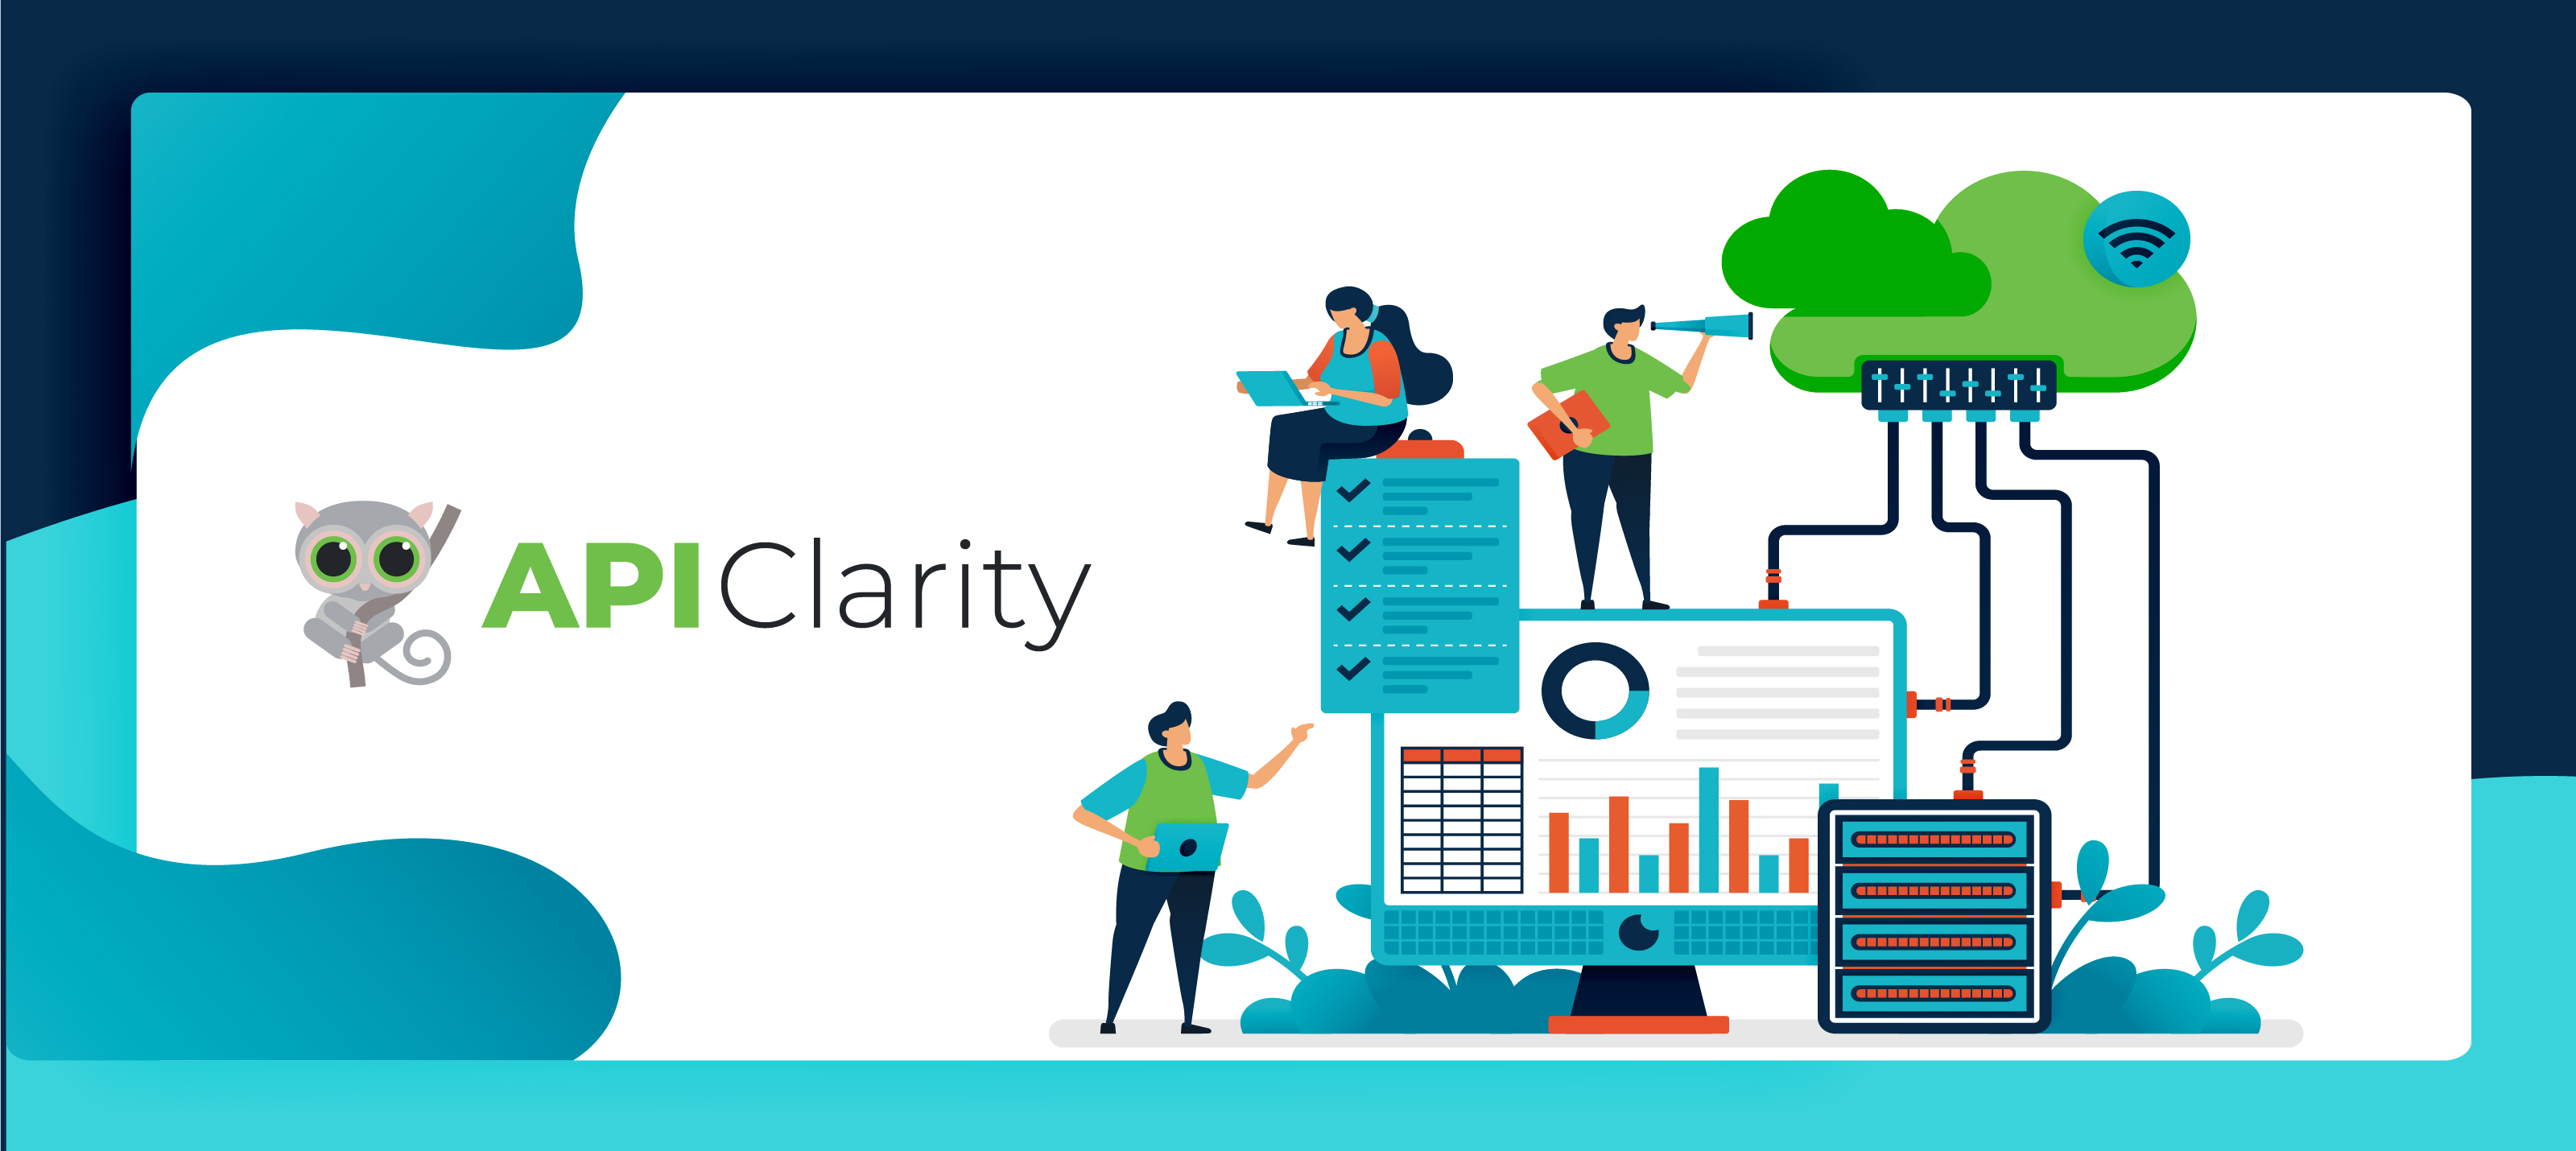 APIClarity, a New Open Source Solution to Ensure API Visibility & Enhan...